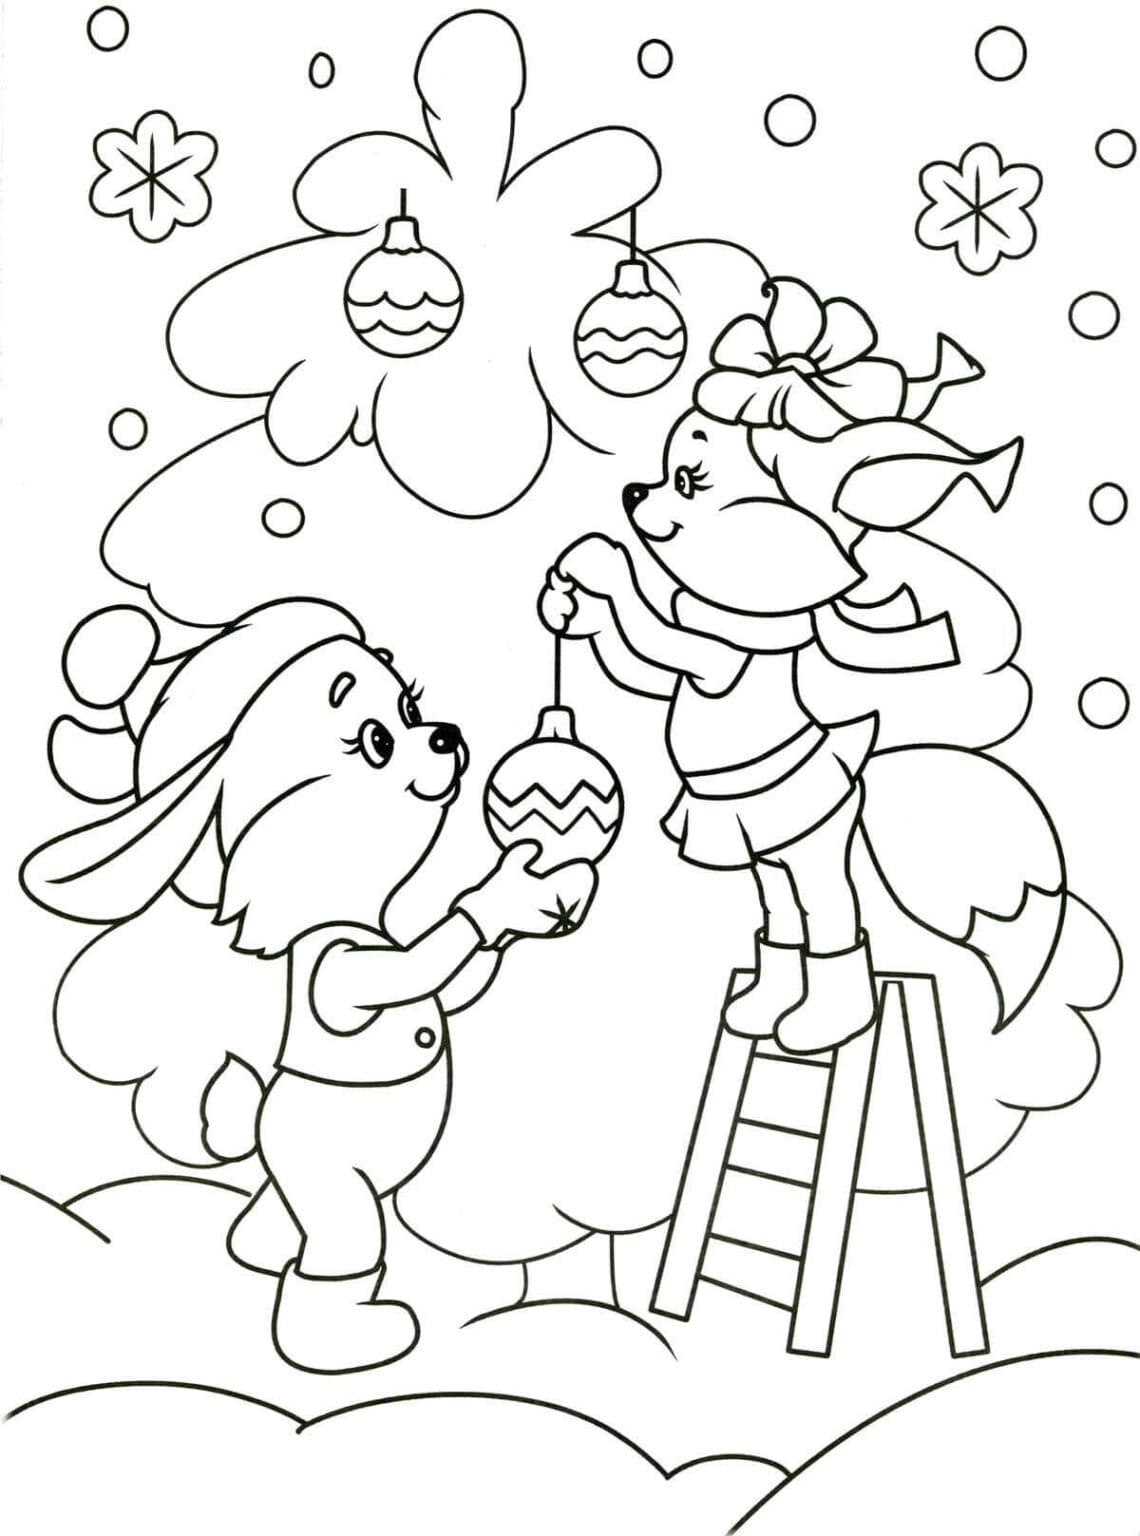 Christmas Tree Decoration With Rabbit Coloring Page